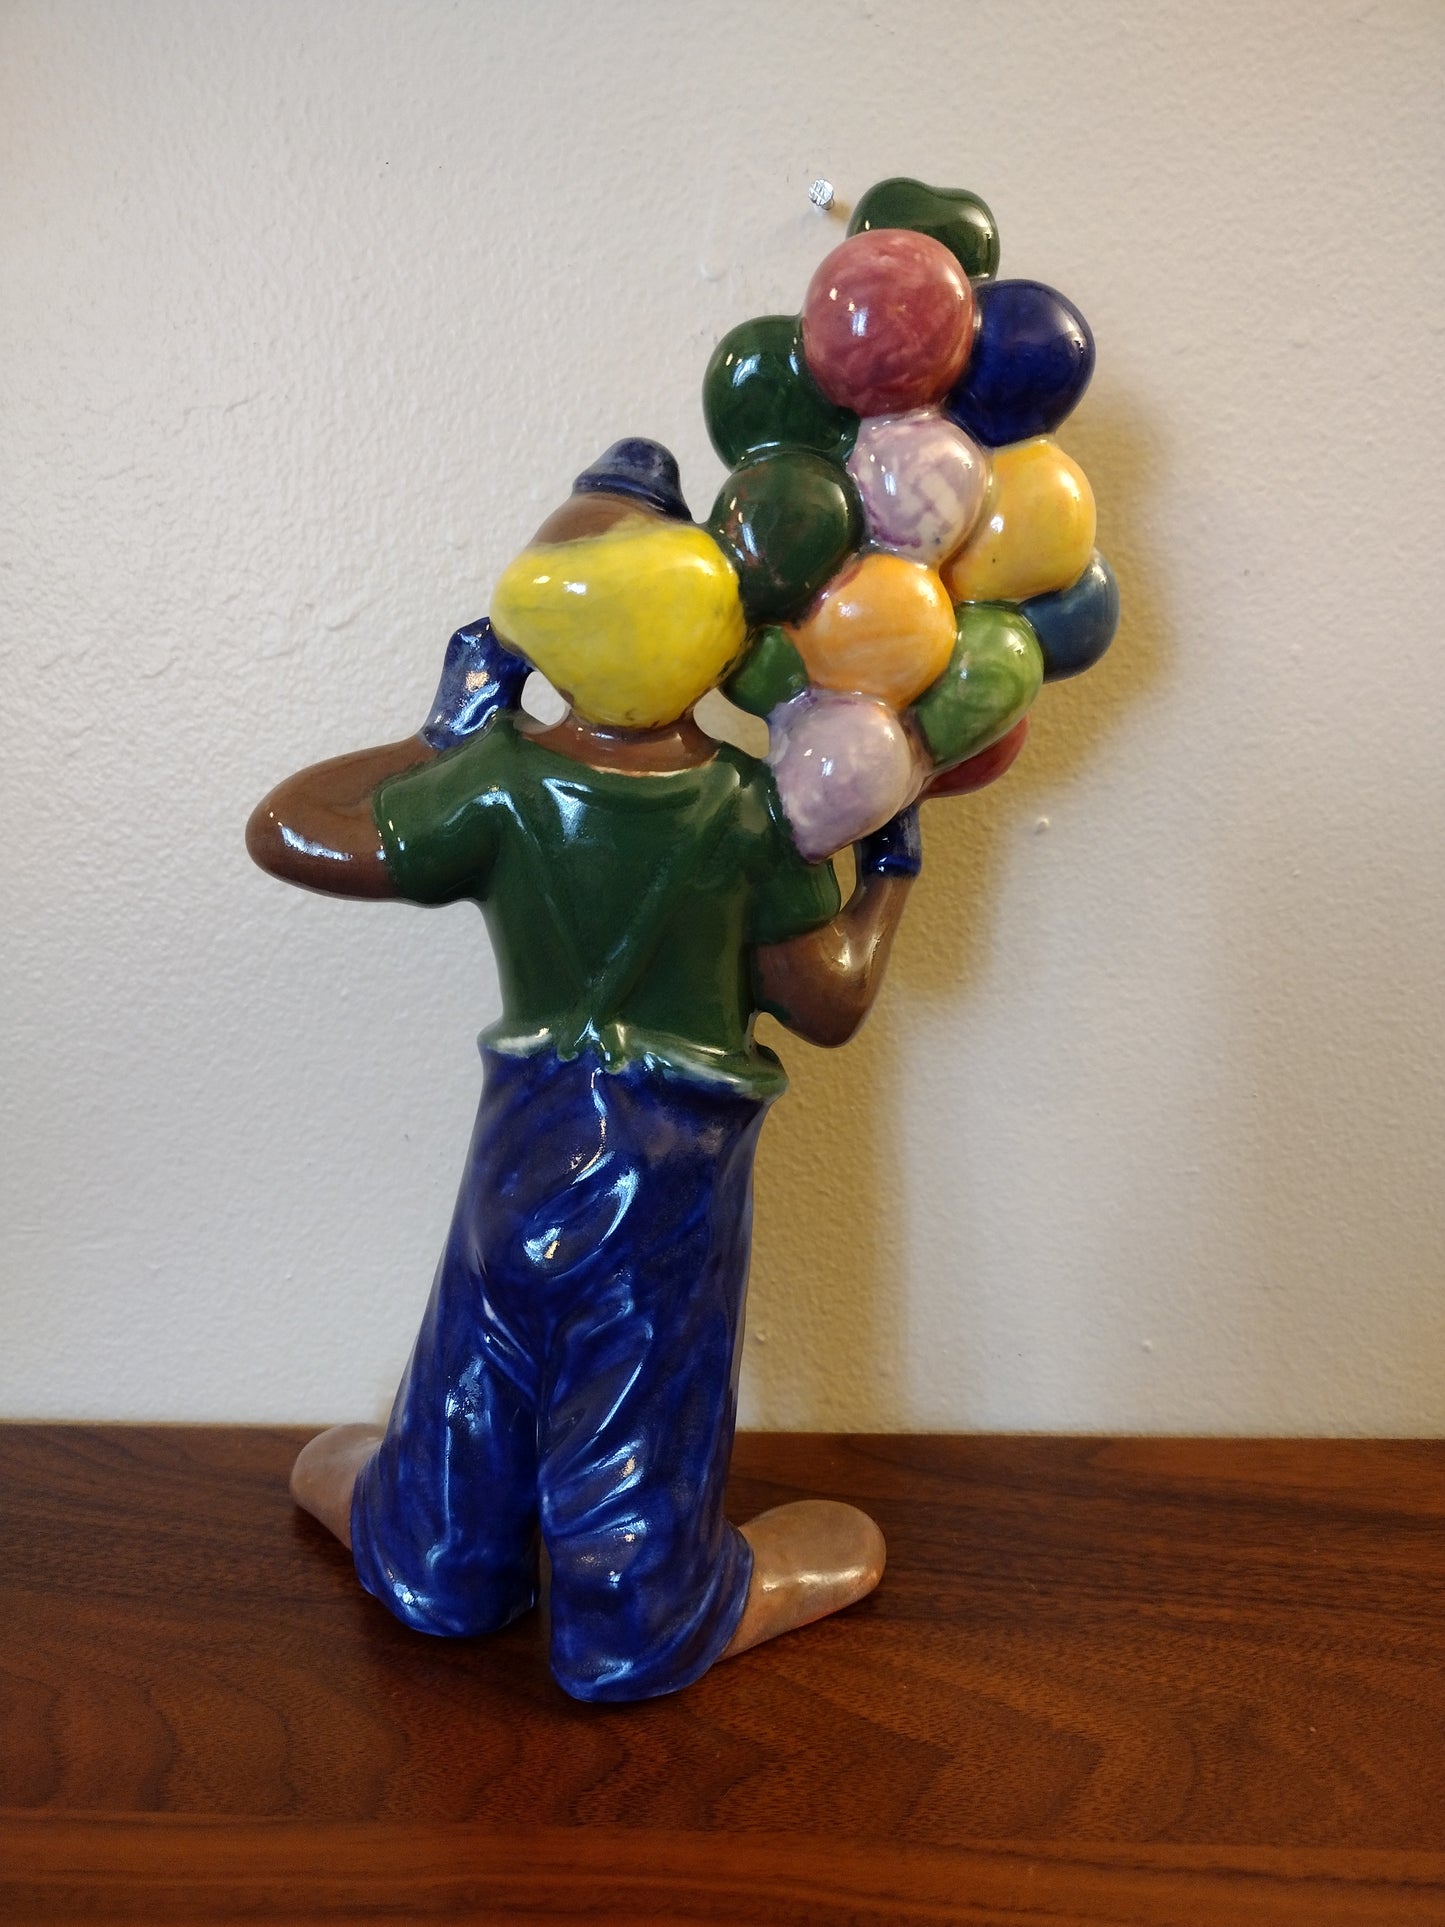 Vintage 10" Balloon Man Figurine   Pre Owned Good Condition Multi Color